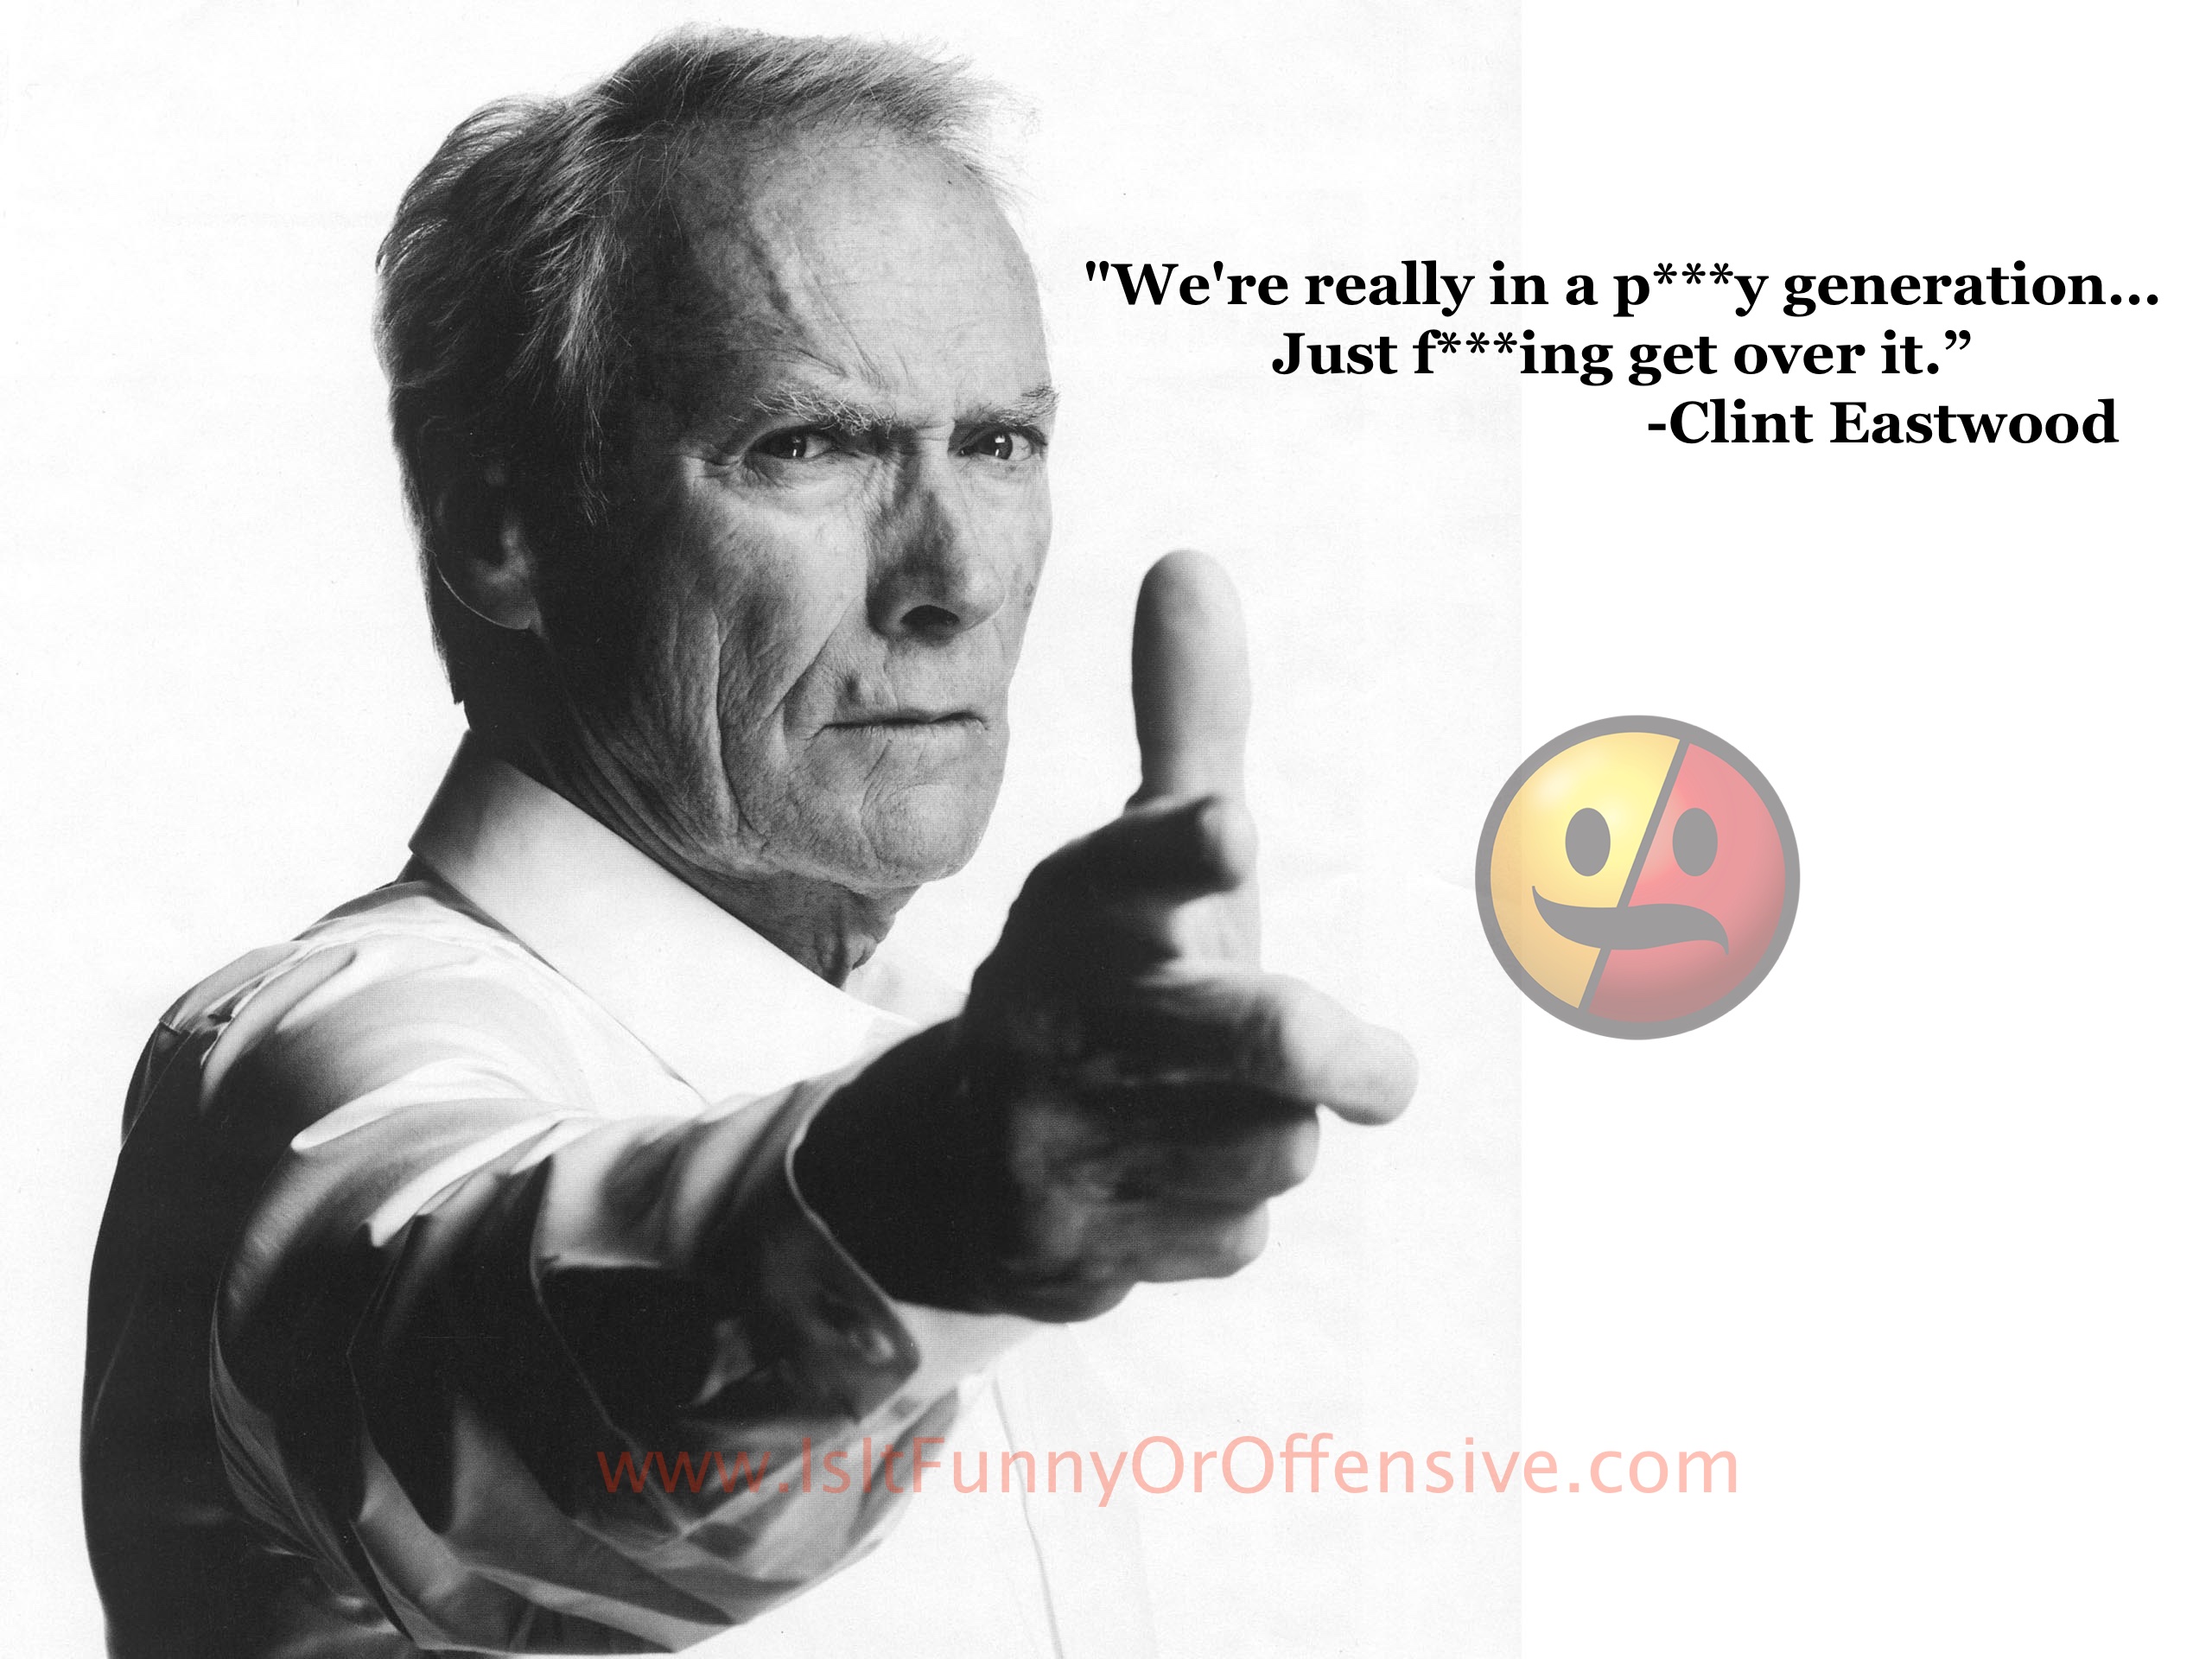 Clint Eastwood "We're Really in a P***Y Generation"